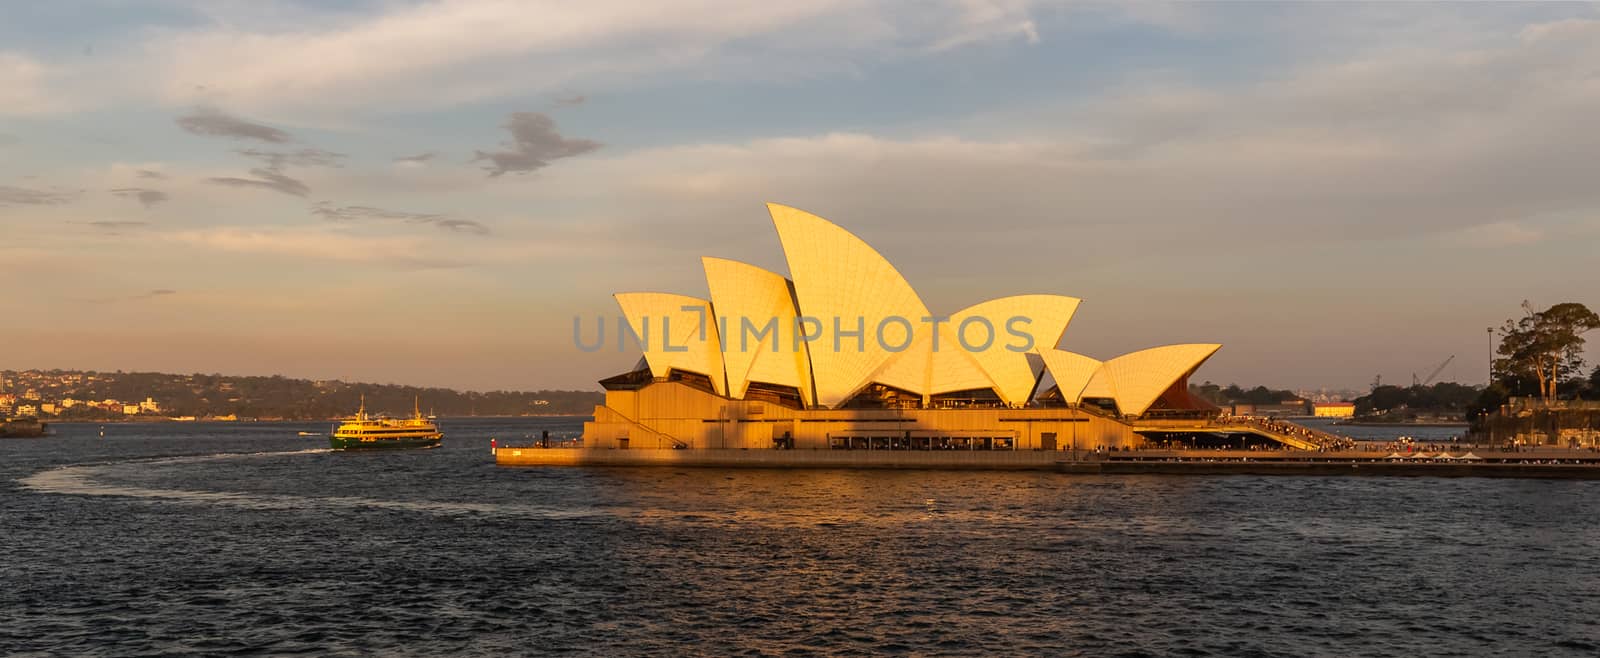 Sydney Harbor, Australia - November 1, 2018: Sydney Opera House at sunset. Boat circling the house in the bay. Beautiful orange-and-yellow colors. Cloudy sky in the background.